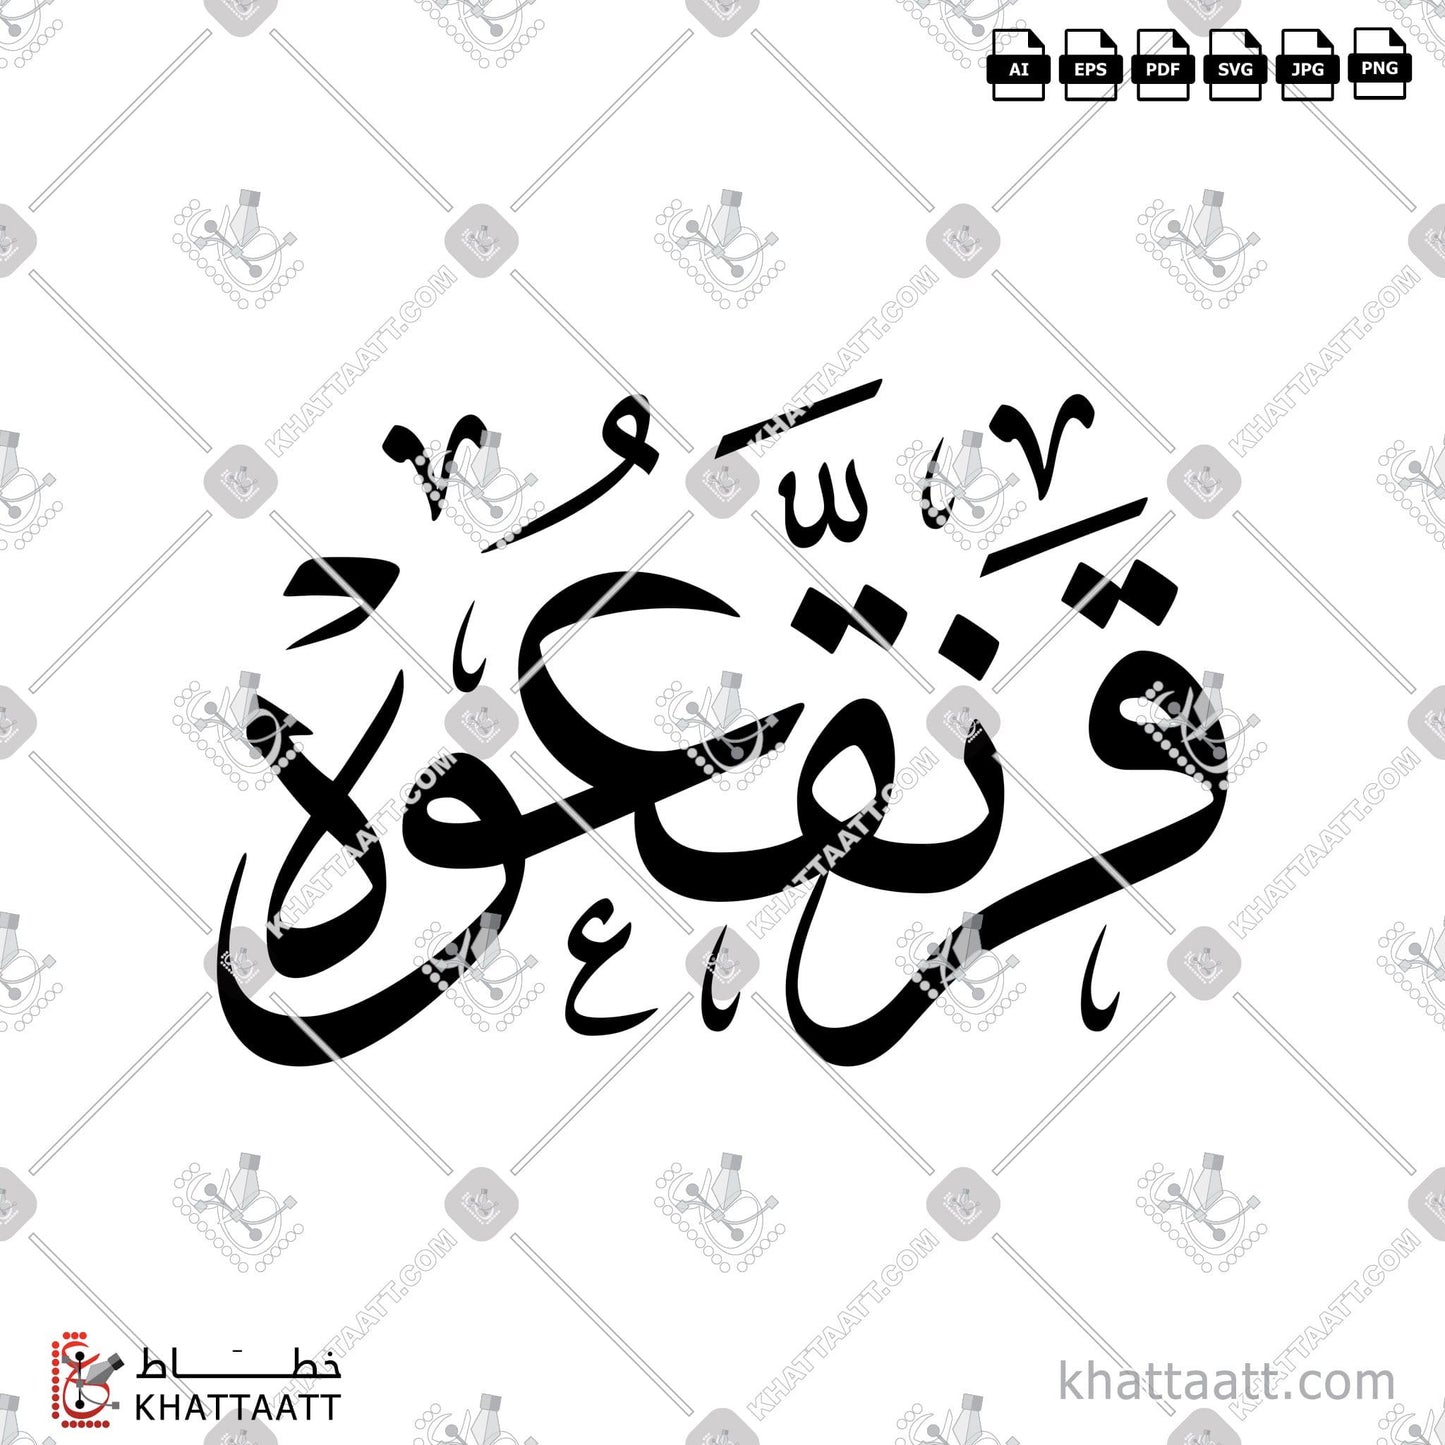 Download Arabic Calligraphy of قرنقعوه in Thuluth - خط الثلث in vector and .png